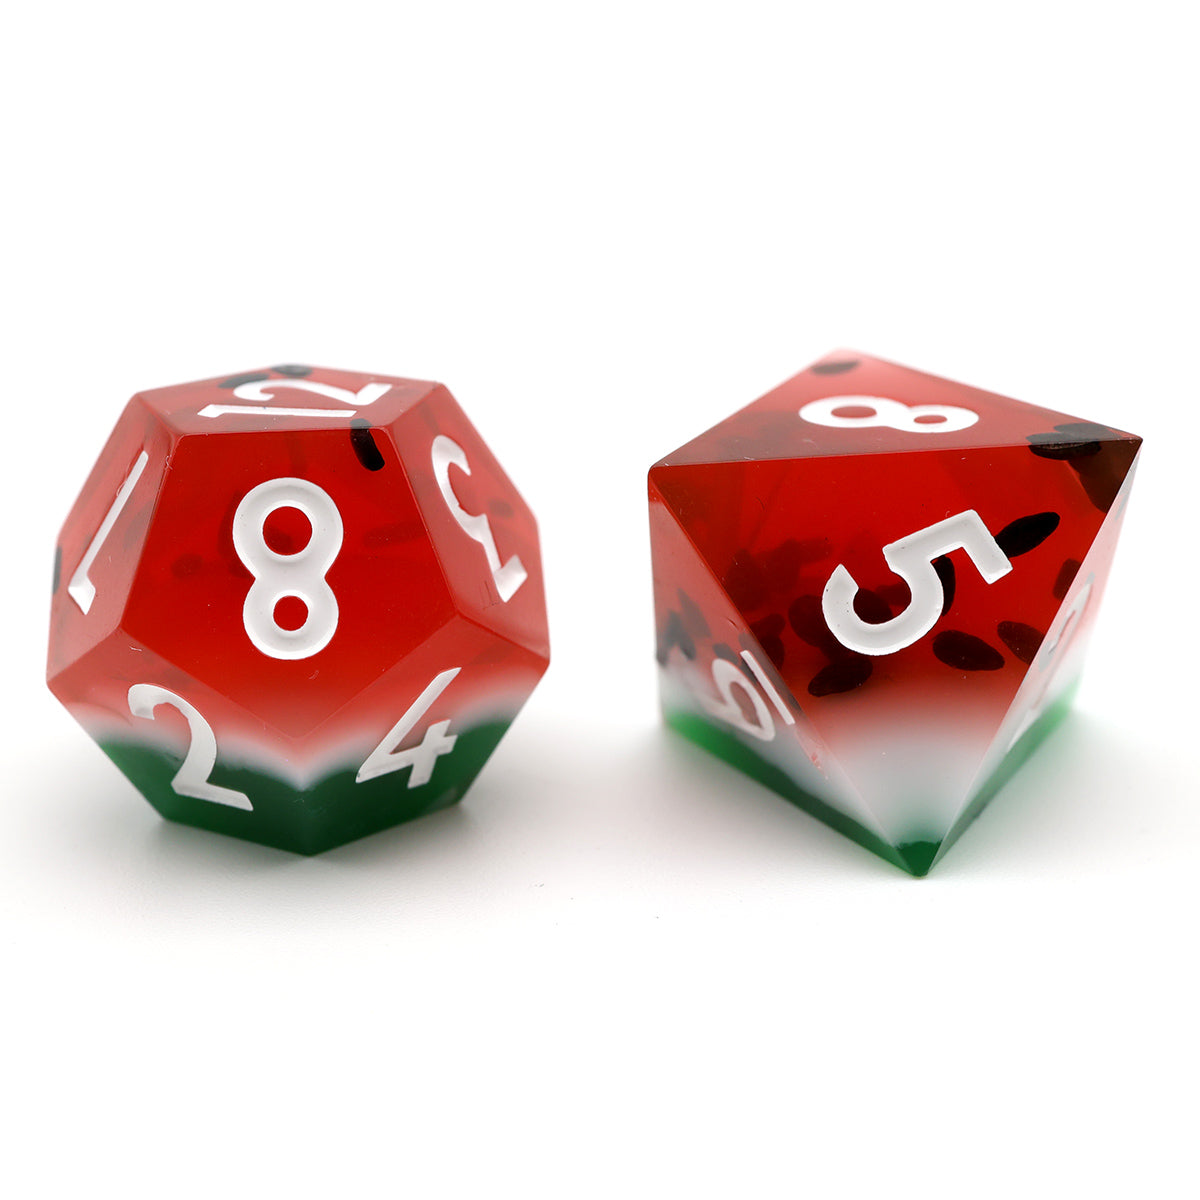 Watermelon dnd/TTRPG dice sets for dnd role playing games and dice goblin collectors from a UK dice store